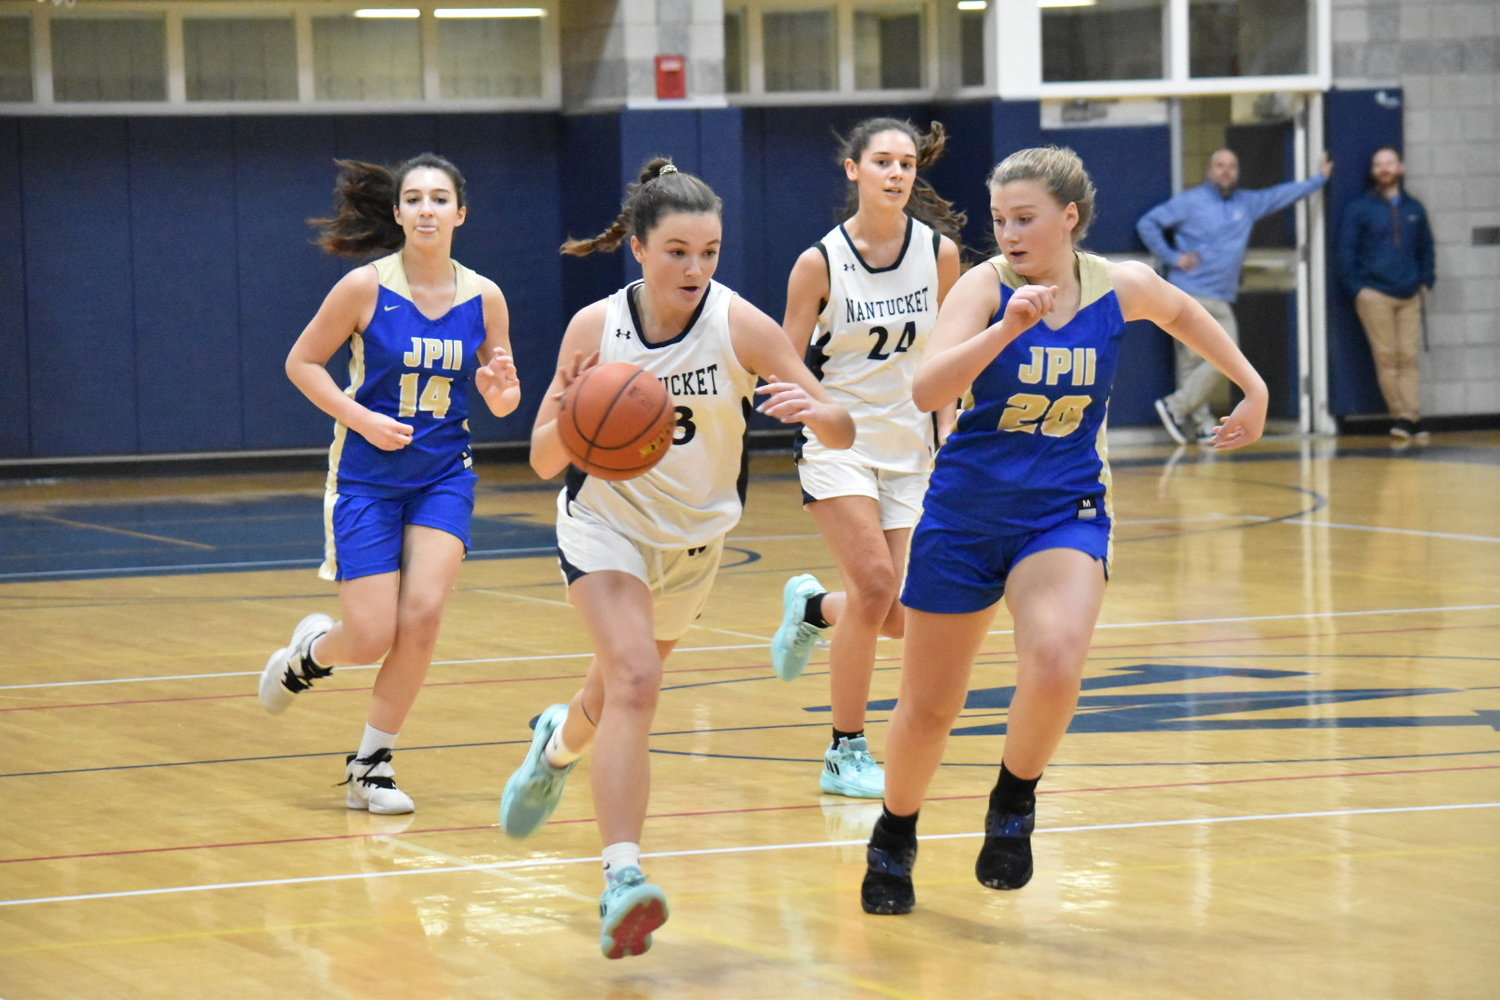 Maddie Lombardi dribbles up the court during Friday's game against St. John Paul II. The sophomore led the Whalers with 15 points in the 50-35 loss.